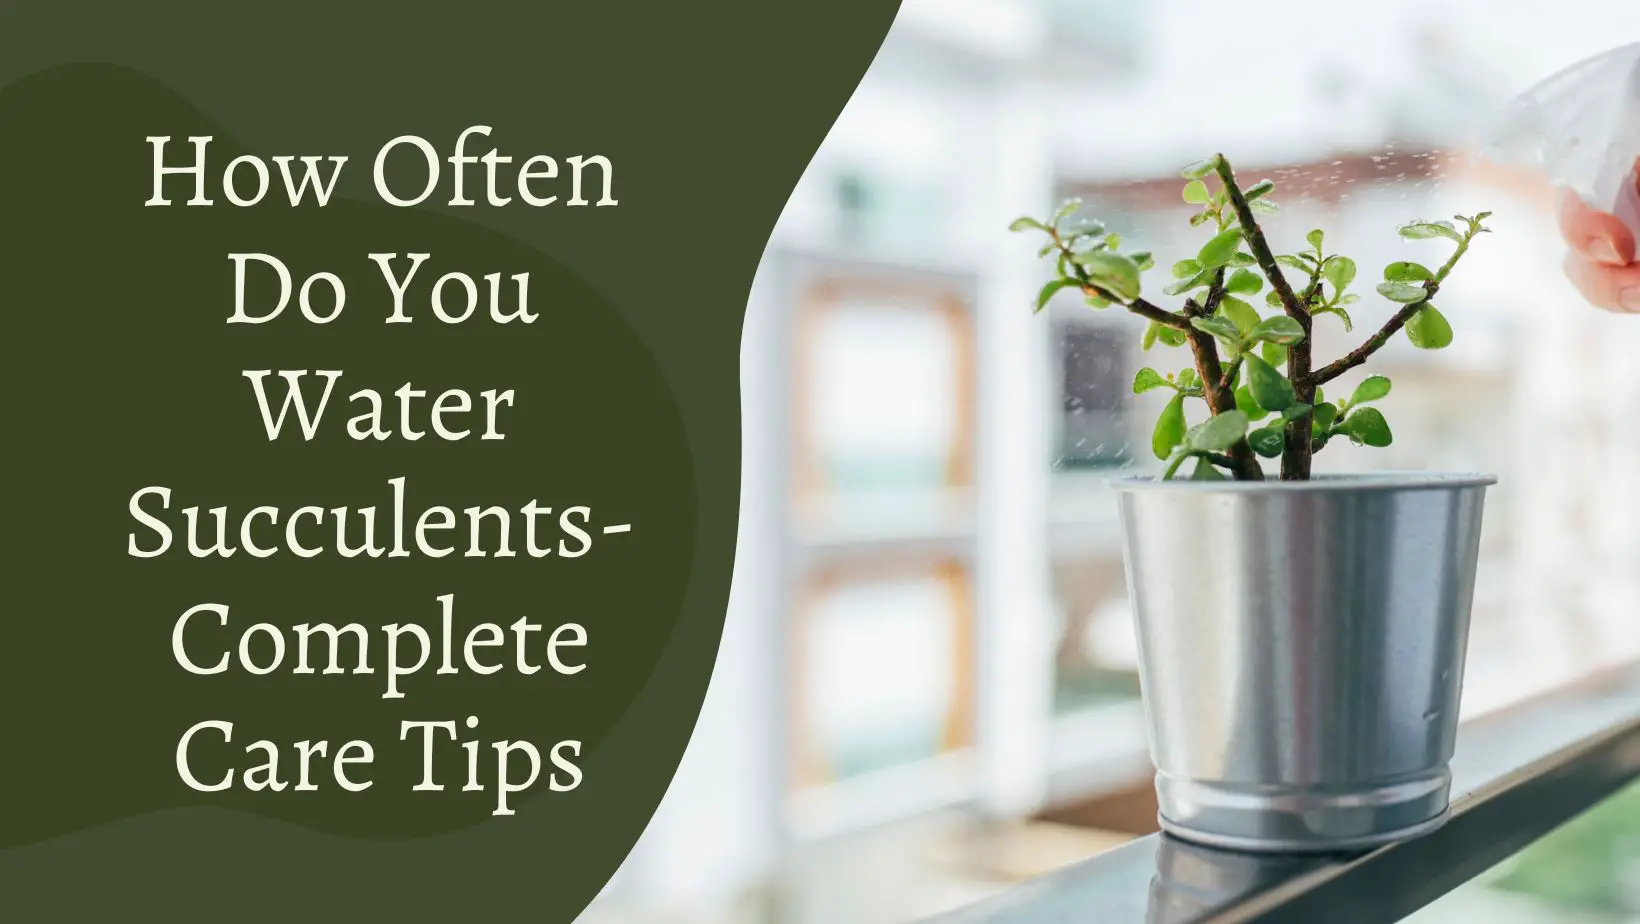 How Often Do You Water Succulents